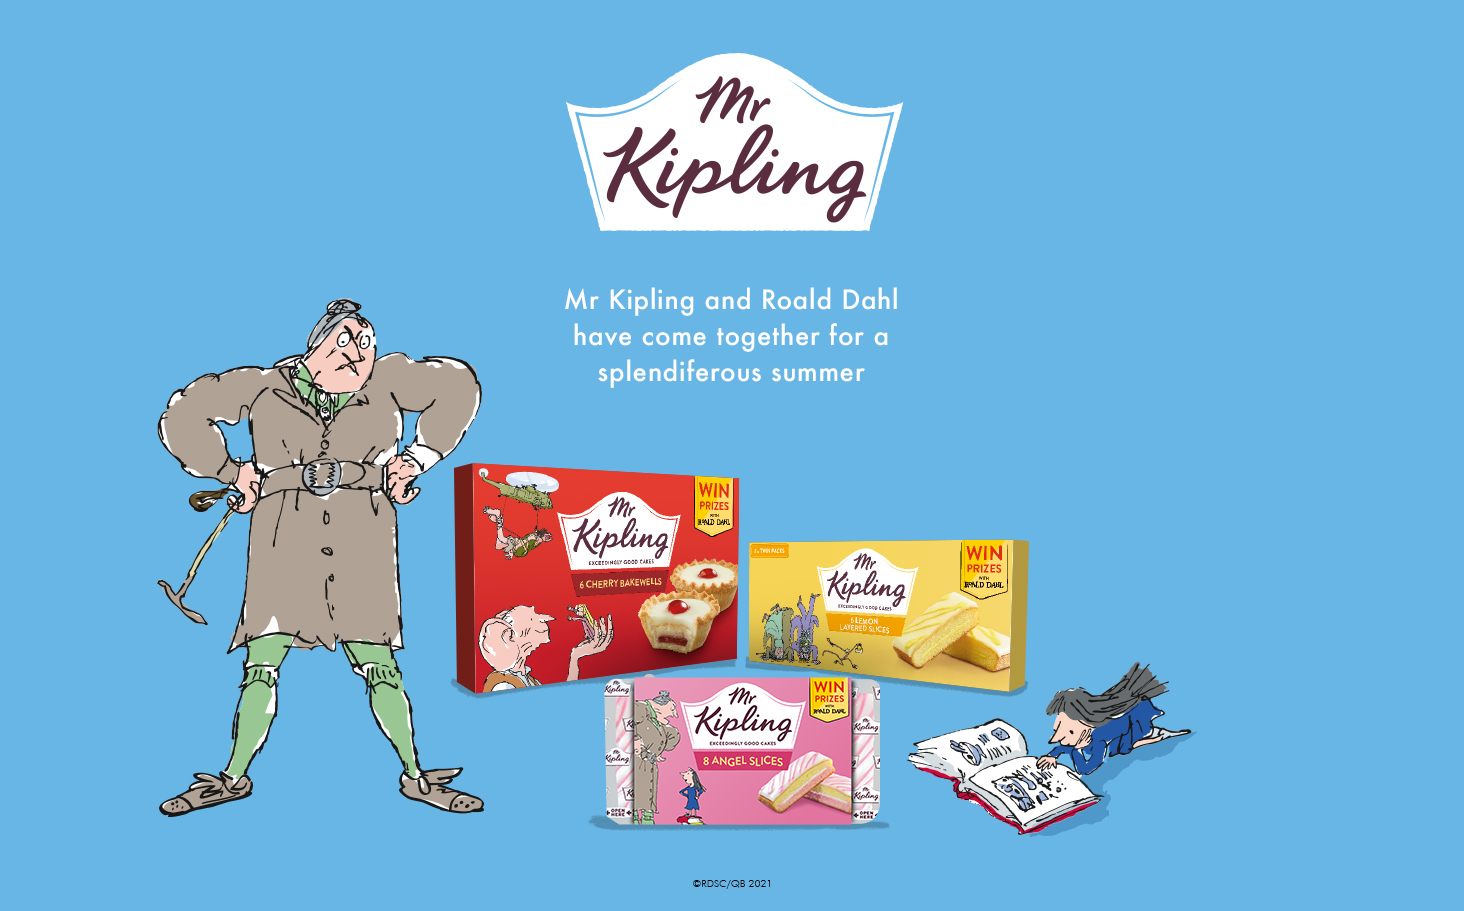 Roald Dahl Heroes and Villains Come to Retailers in Campaign